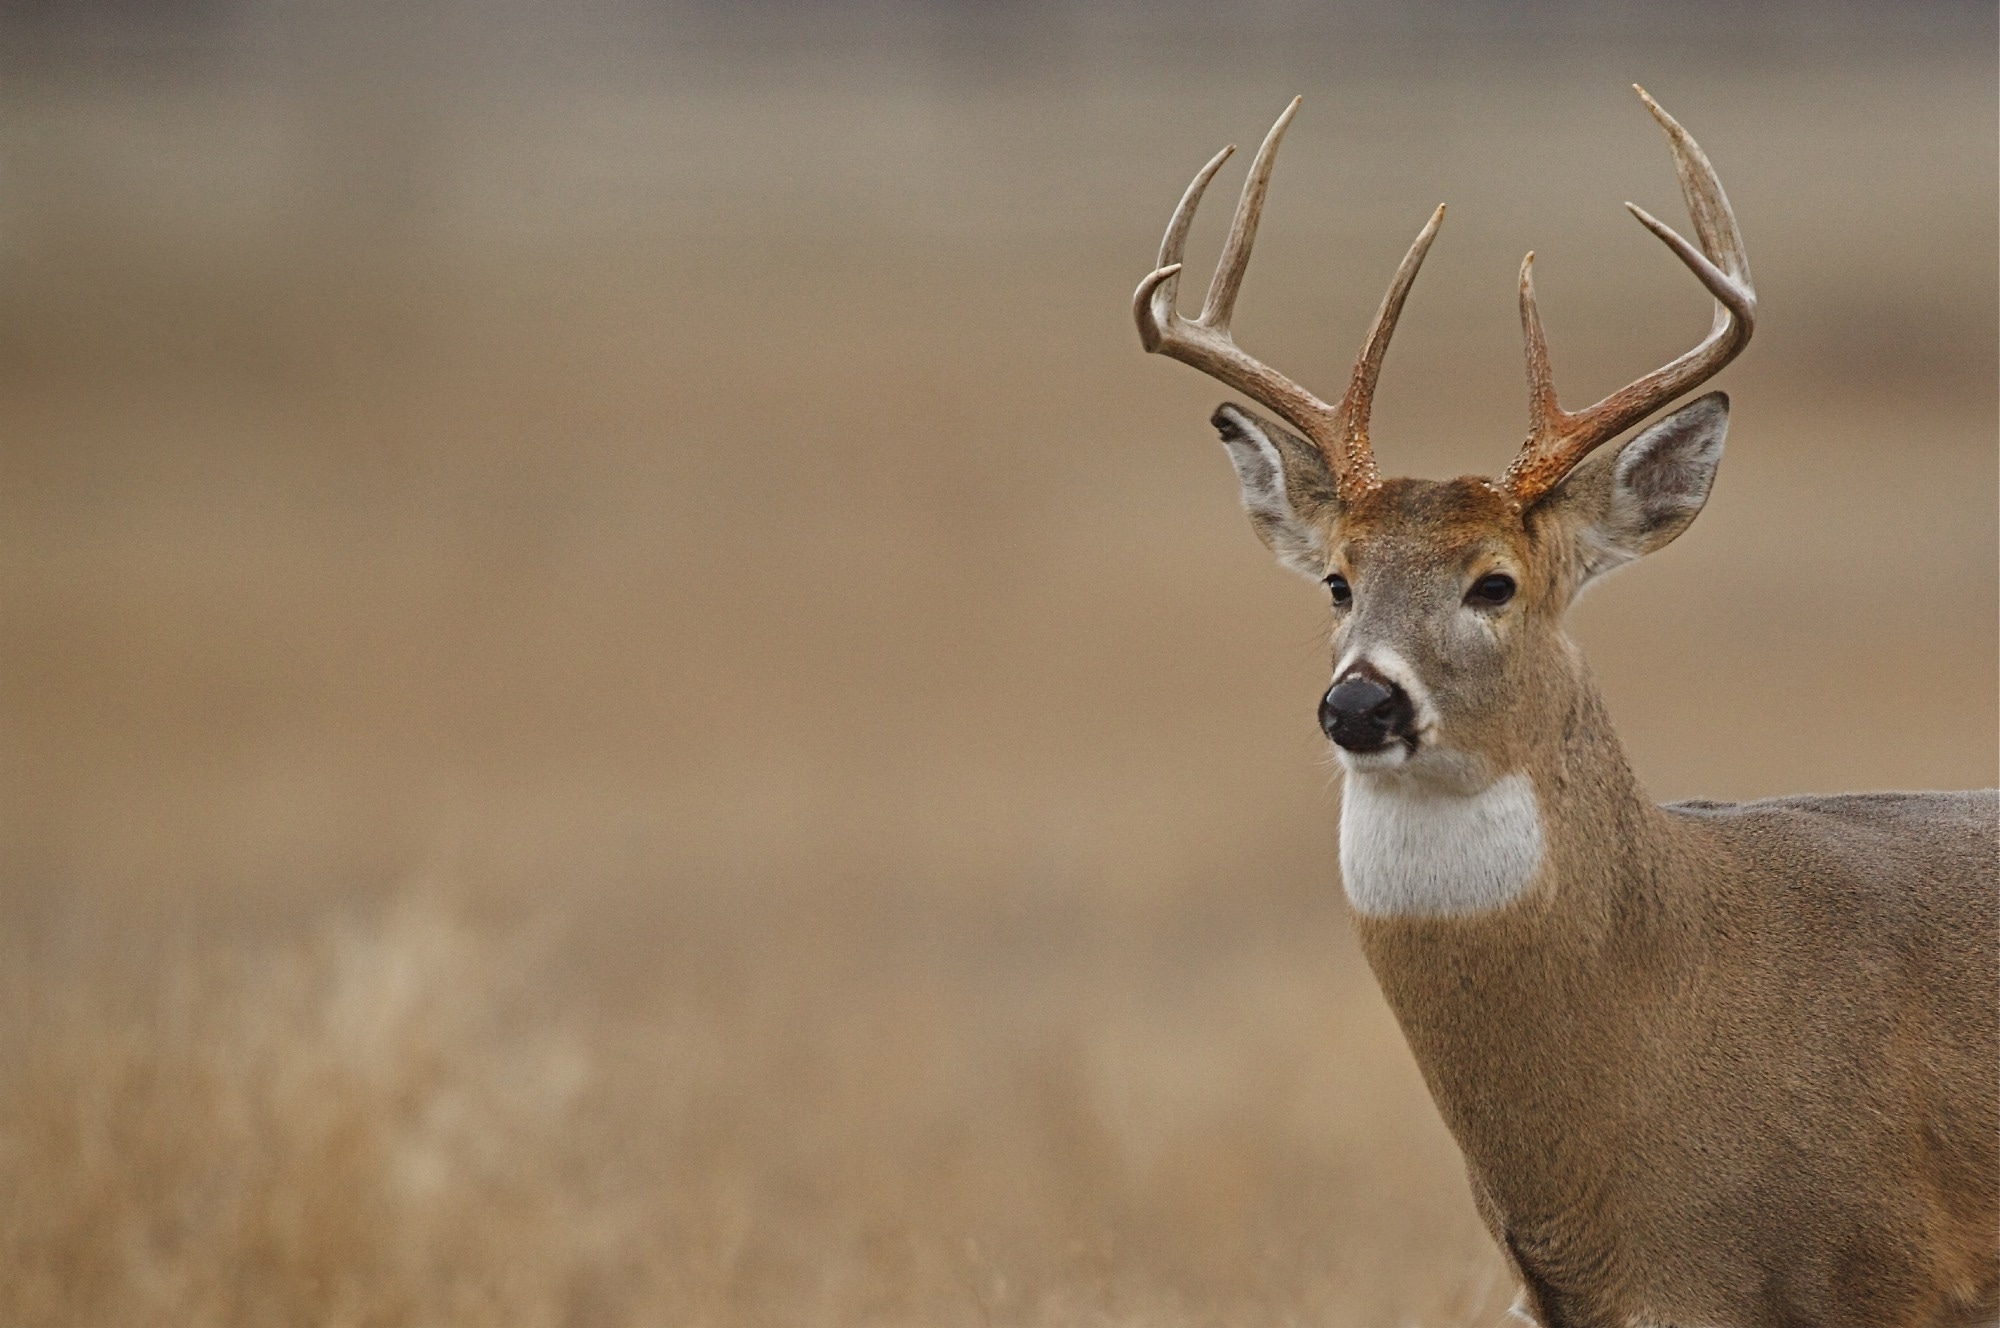 Study: Accelerated evolution of SARS-CoV-2 in free-ranging white-tailed deer. Image Credit: Tom Reichner / Shutterstock.com